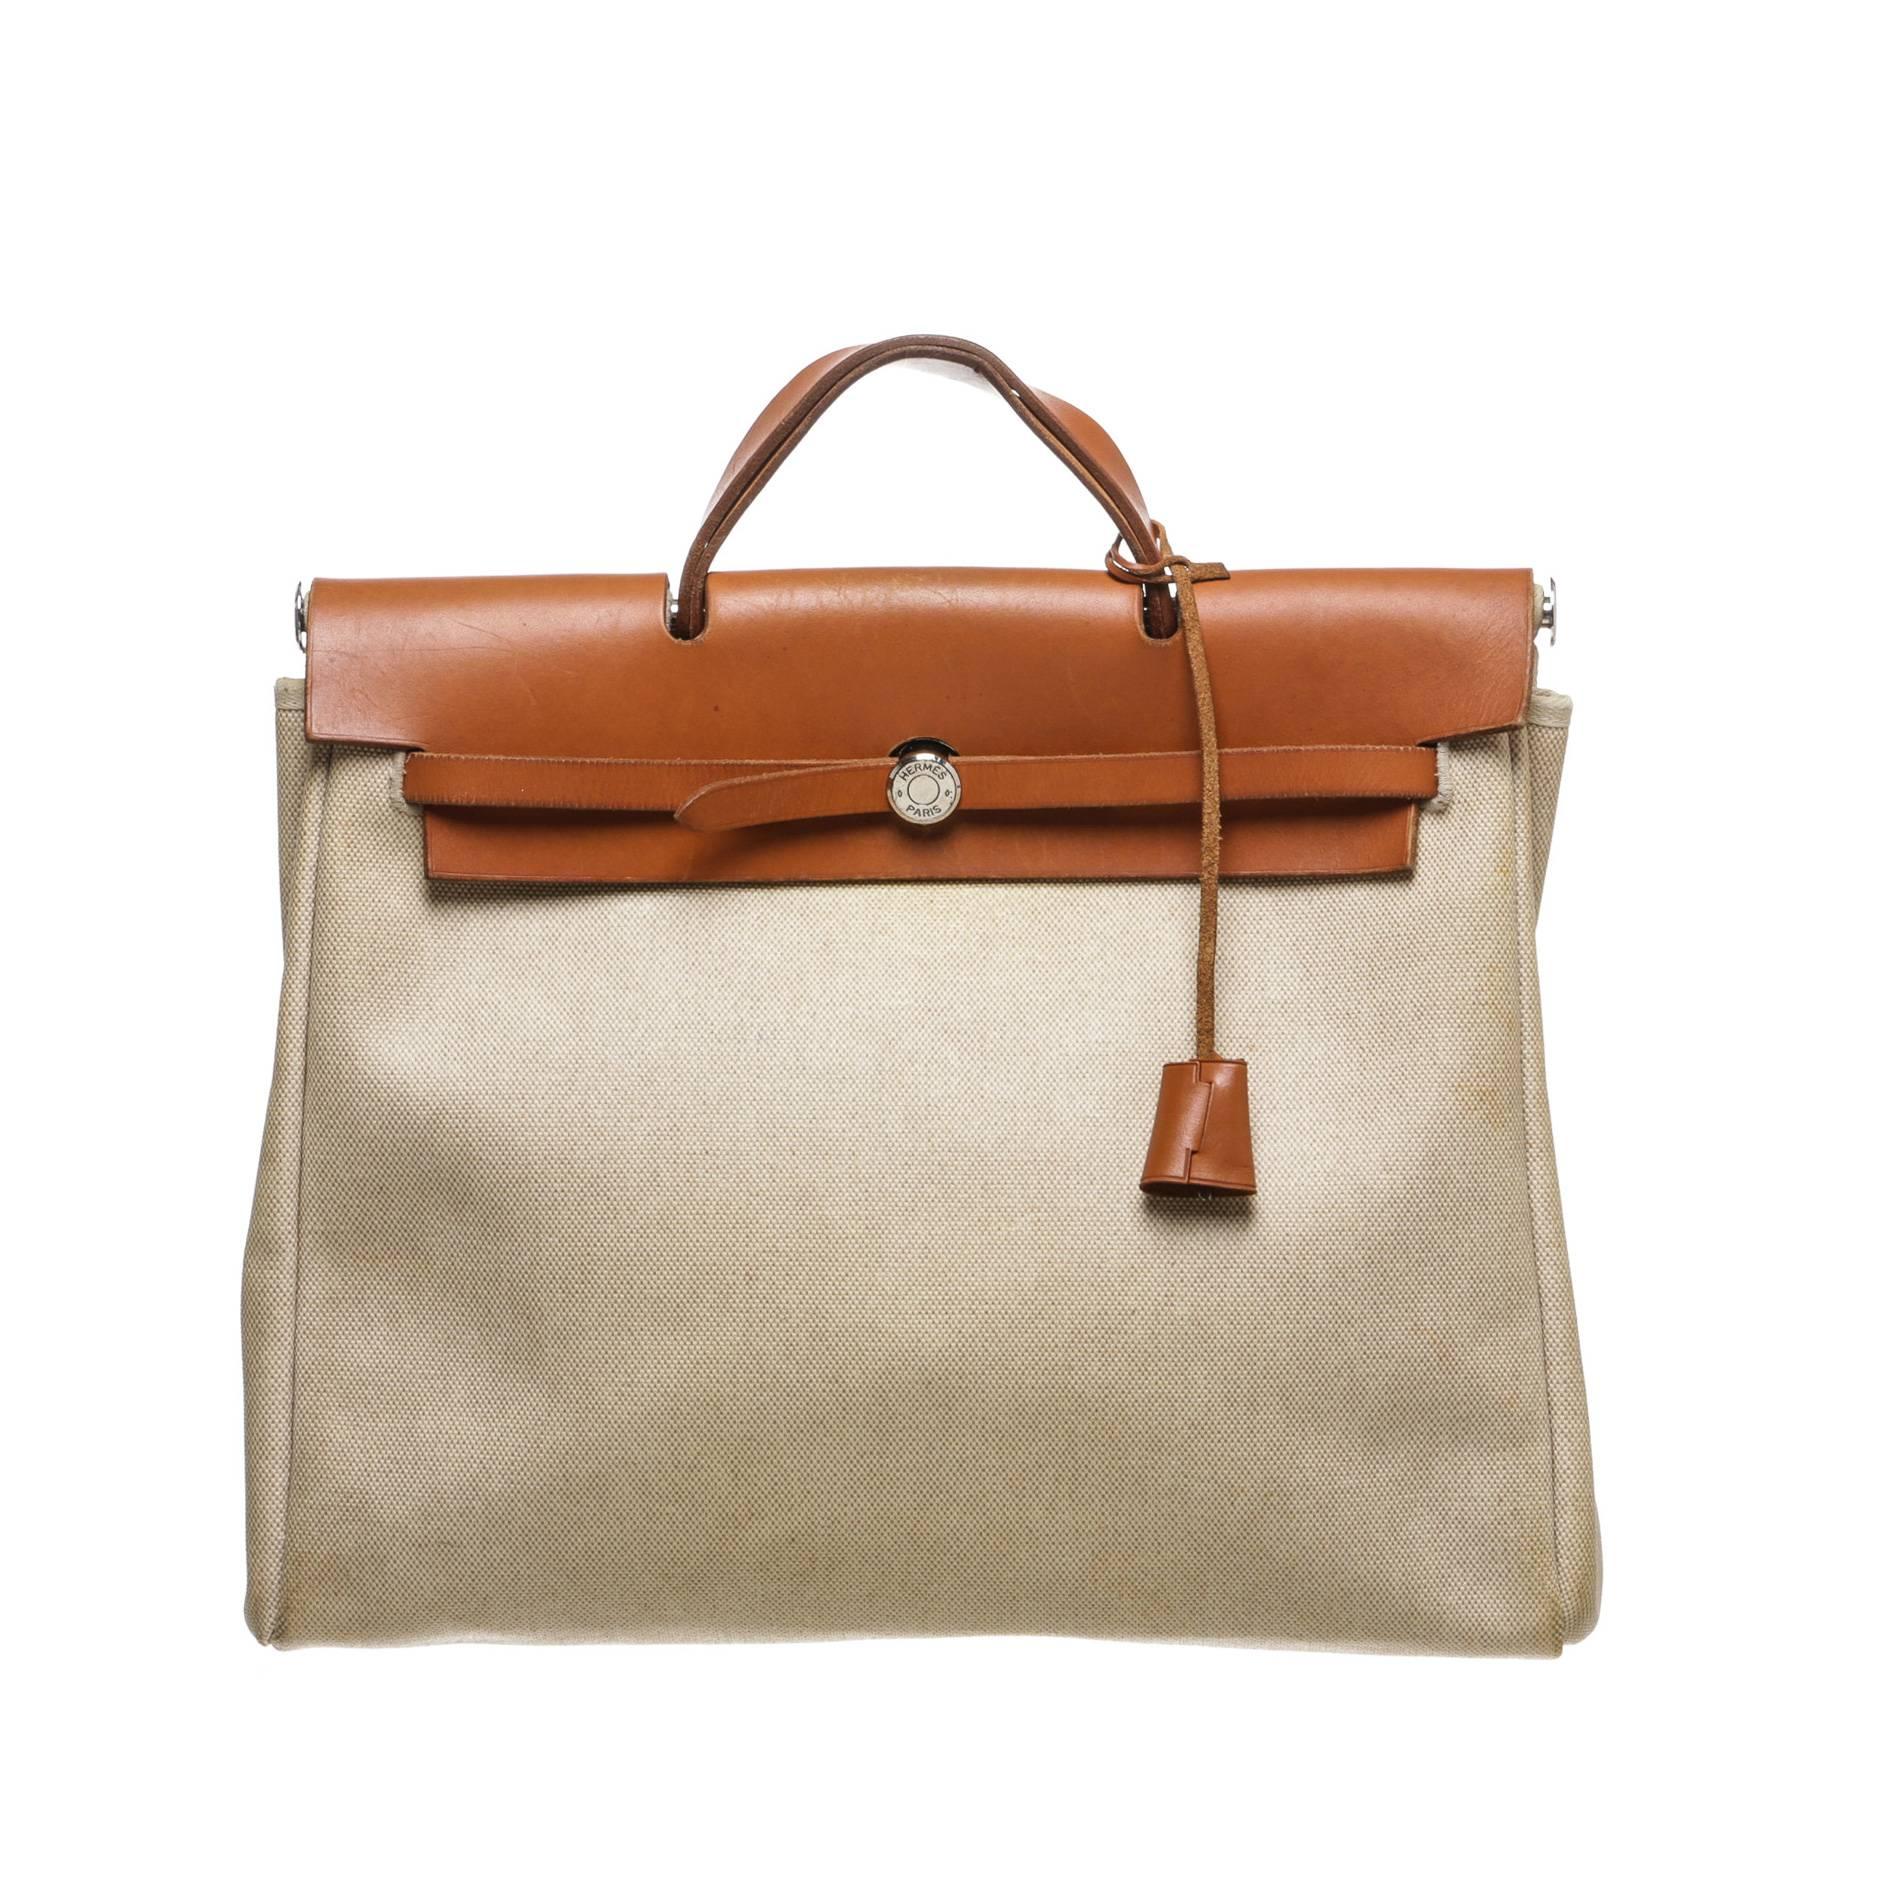  Hermes Toile and Tan Leather Herbag For Sale